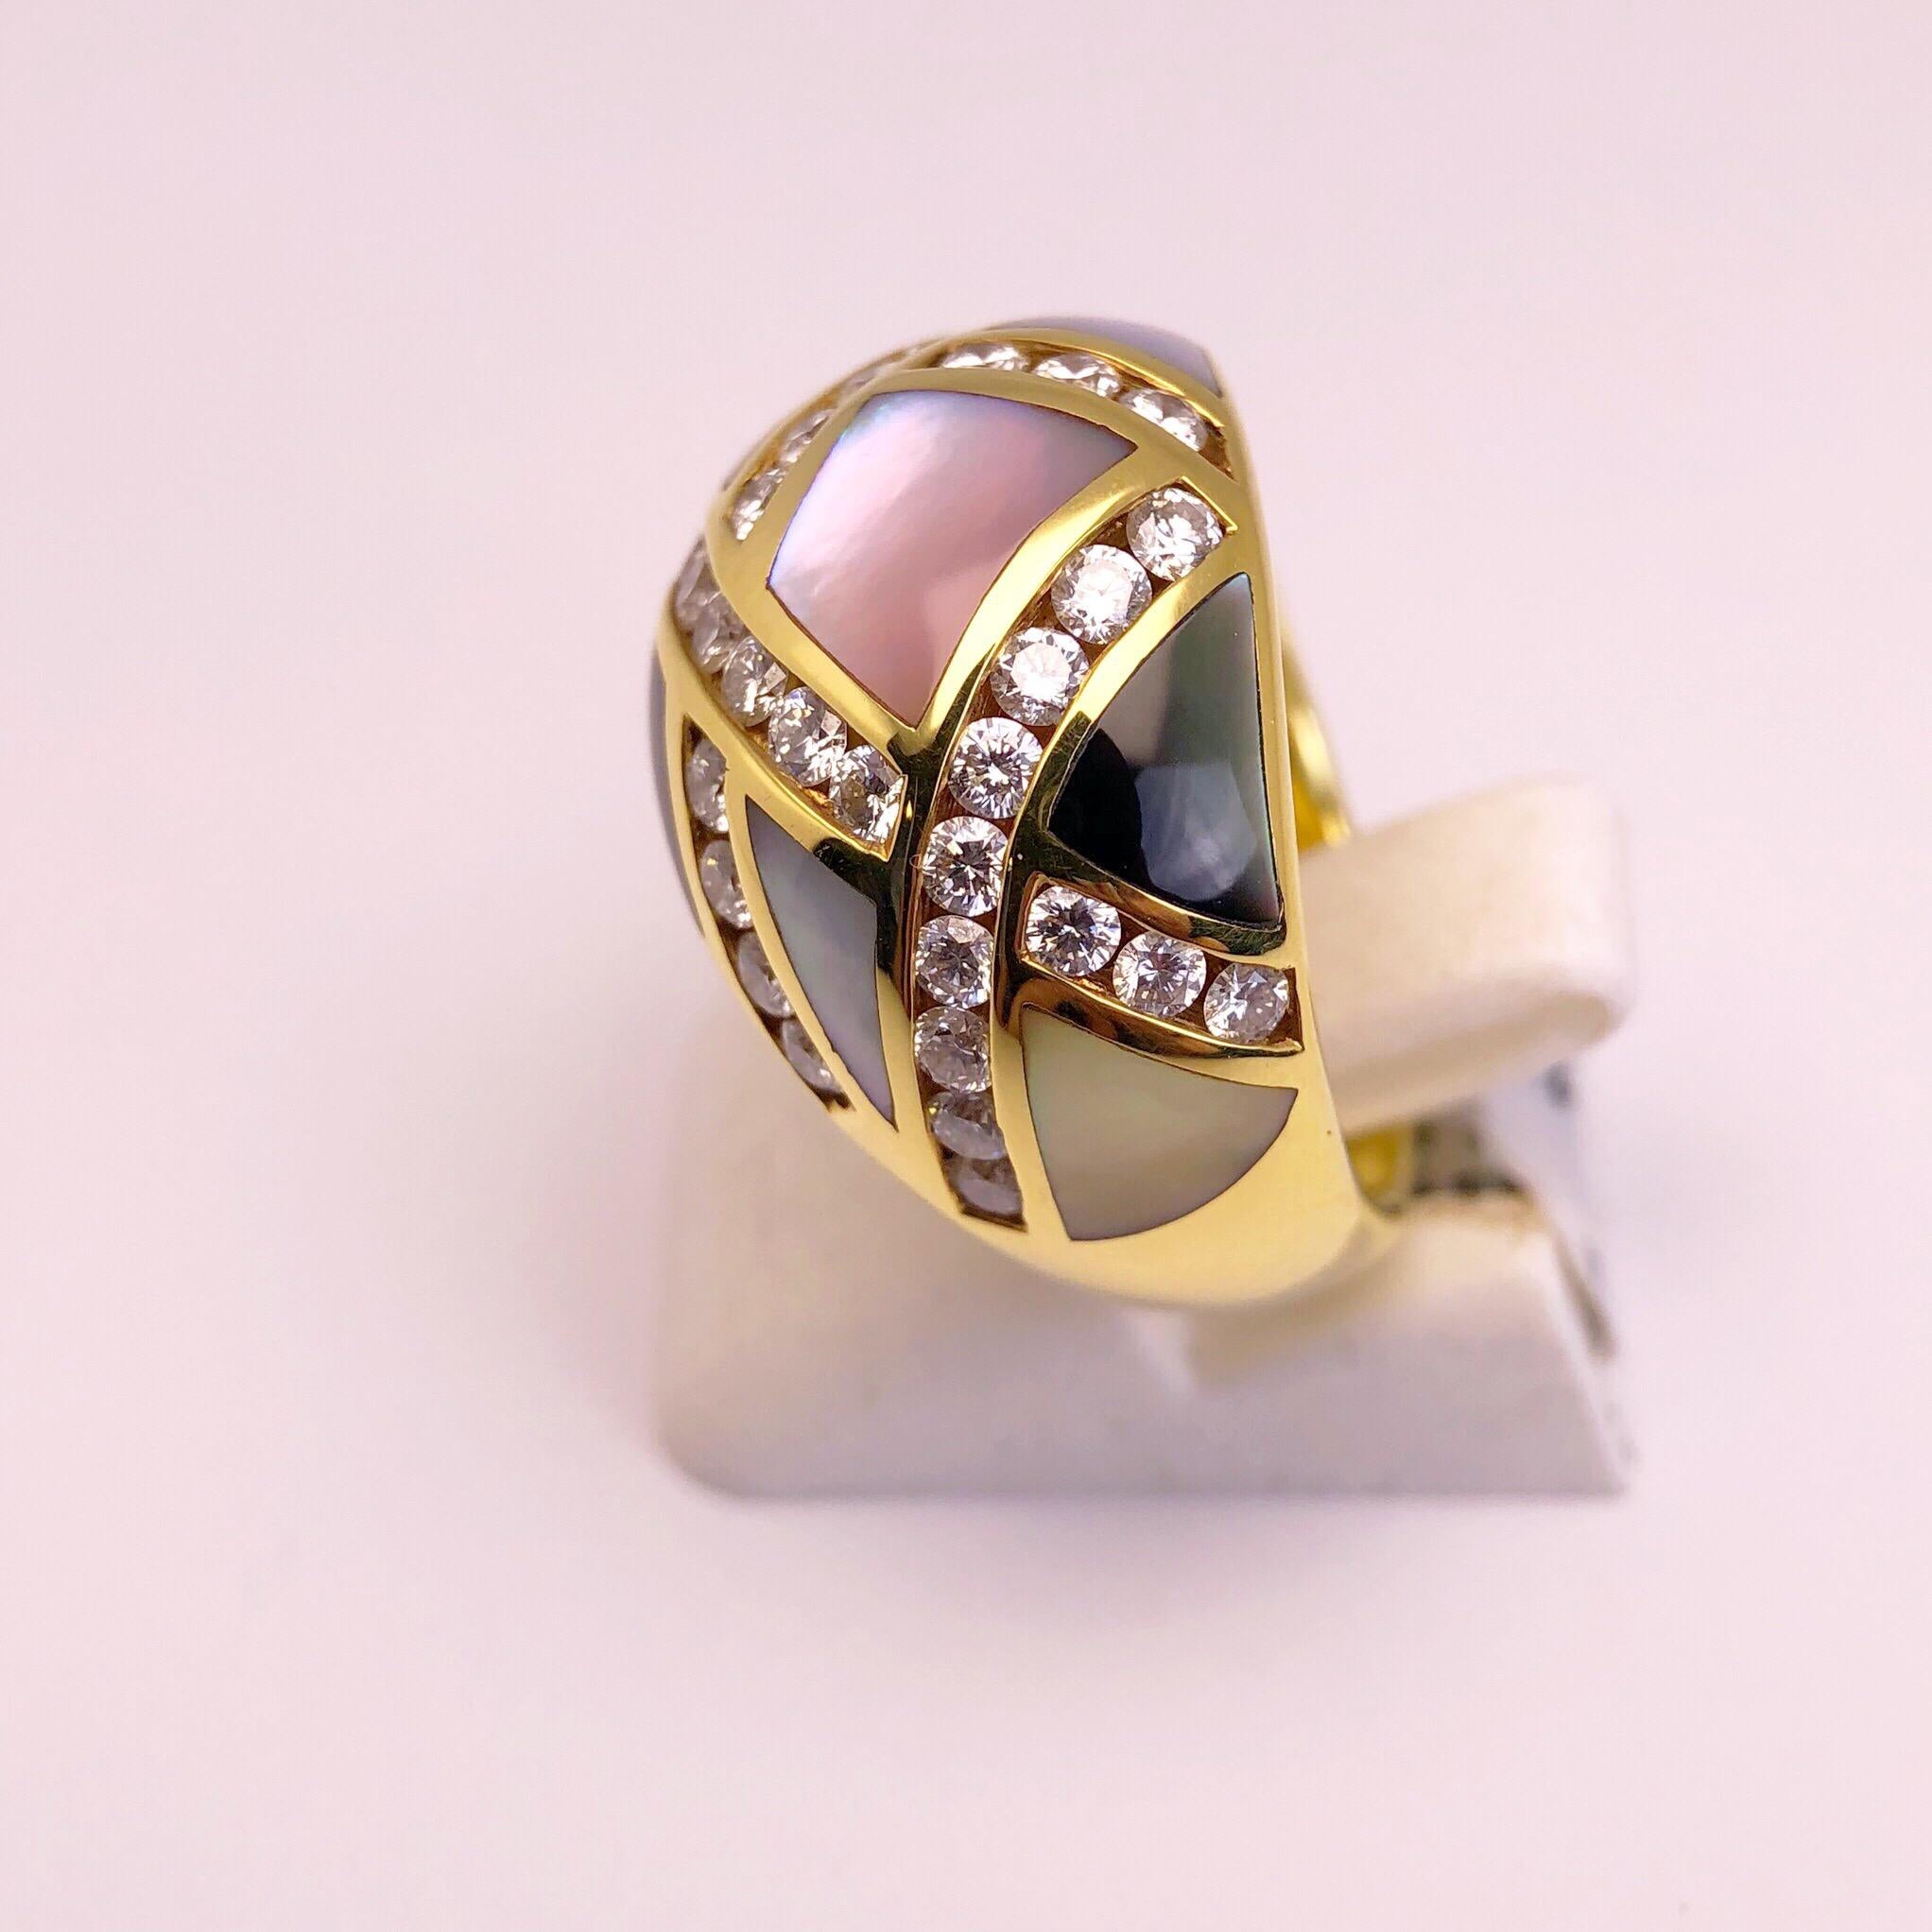 This lovely Asch Grossbardt ring in 18 karat yellow gold. The stunning dome shaped ring is set with geometric shapes of mother of pearl. The mother of pearl are soft shades of yellow, pink, white and grey. Each section is outlined with round